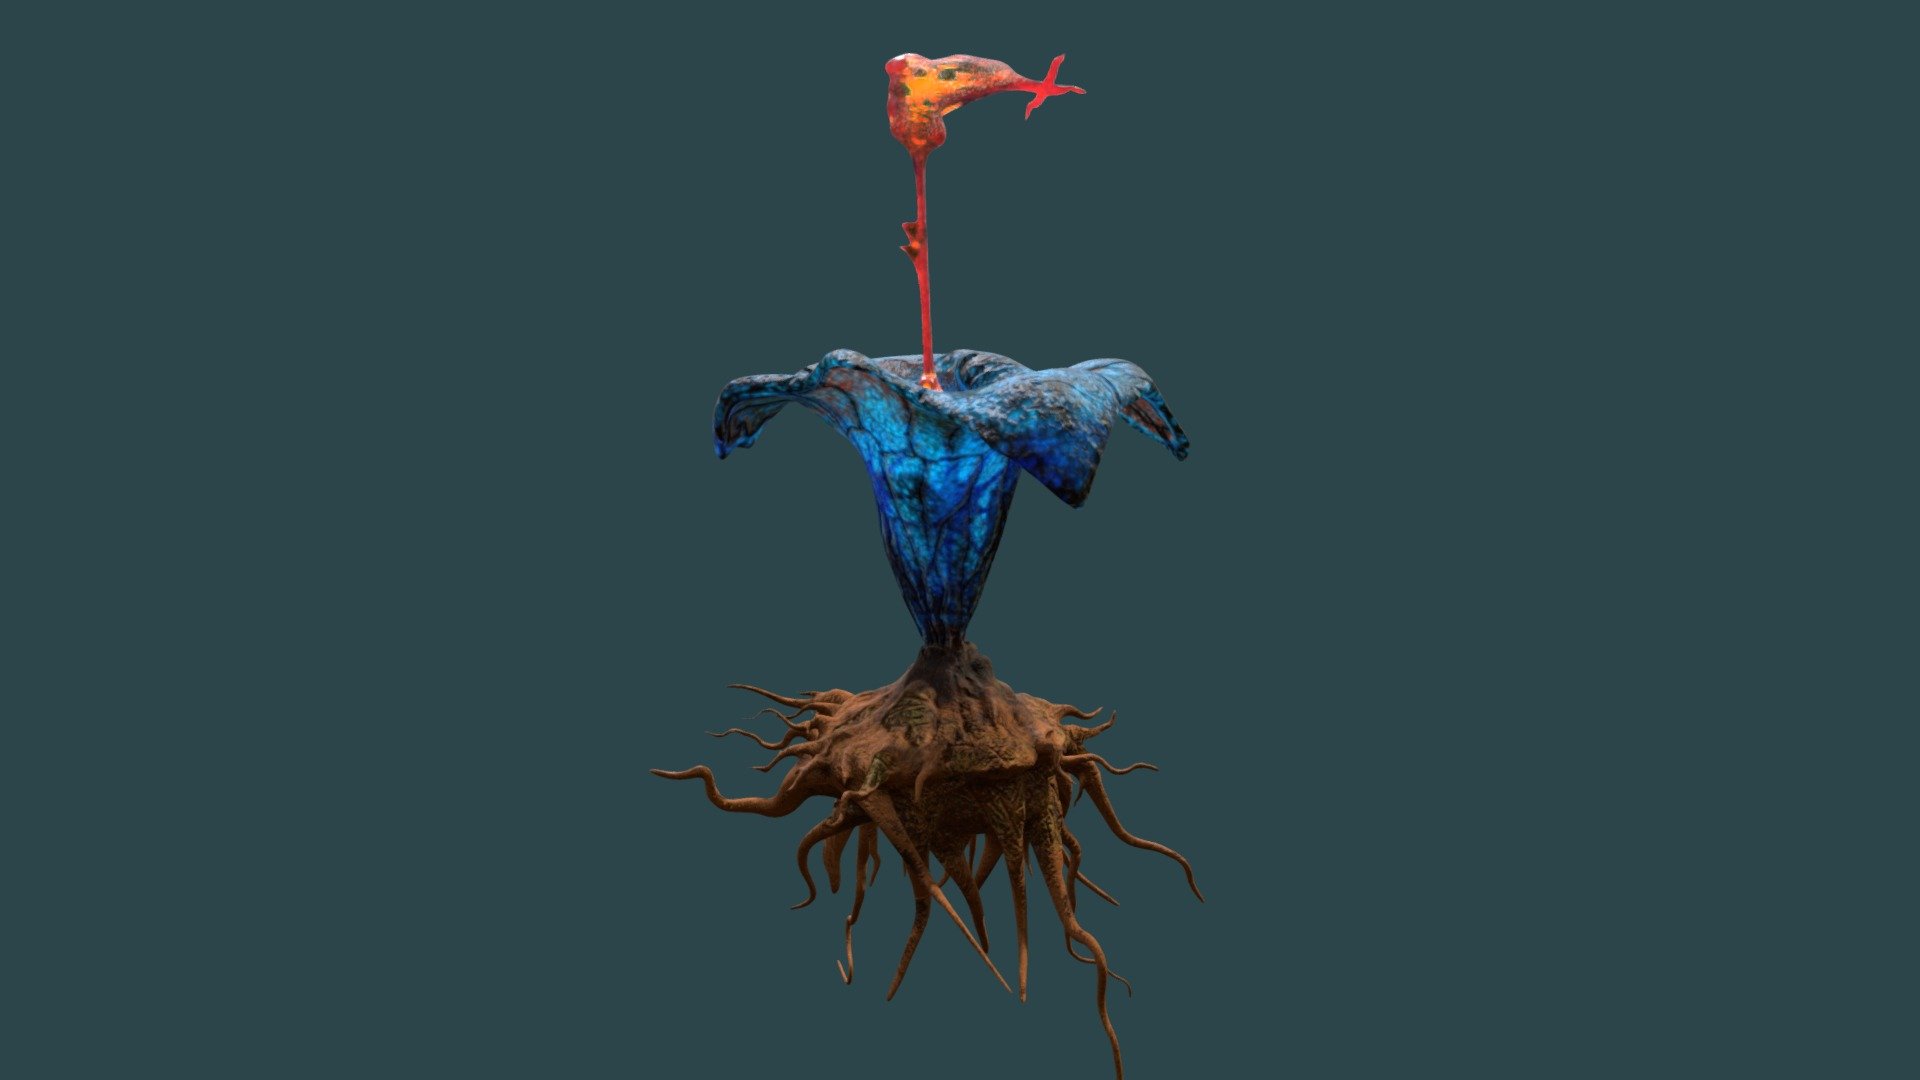 I created this assets for an Felucia environment, It looks like a giant tulip with a glowing wick. Asset was created using Blender and Substance Painter.

If you are interested in more I do, you can check out my post on Artstation: https://www.artstation.com/artwork/xYEBYW - Tulip - Felucia plant - 3D model by phil_creations 3d model